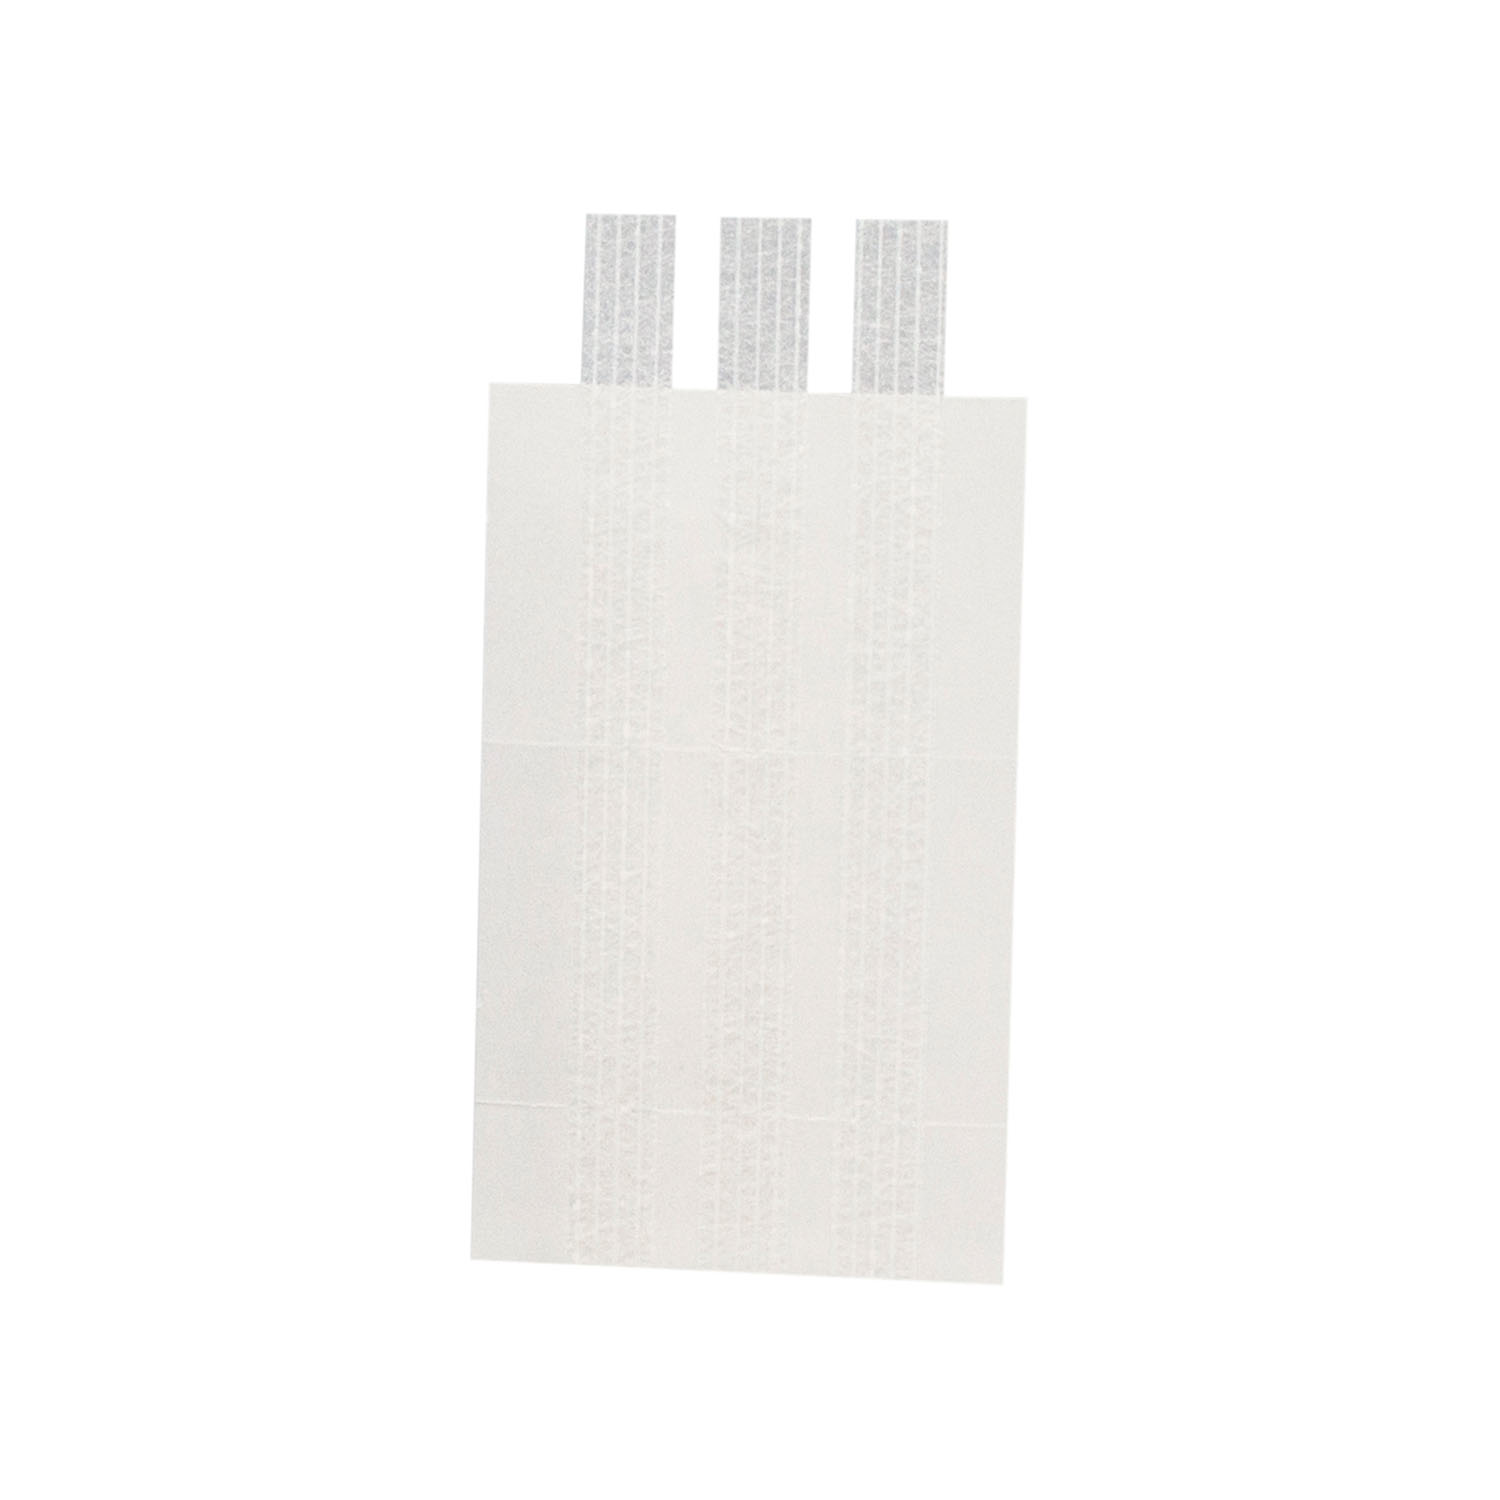 DUKAL WOUND CLOSURE STRIPS : 5152 CS                       $139.47 Stocked